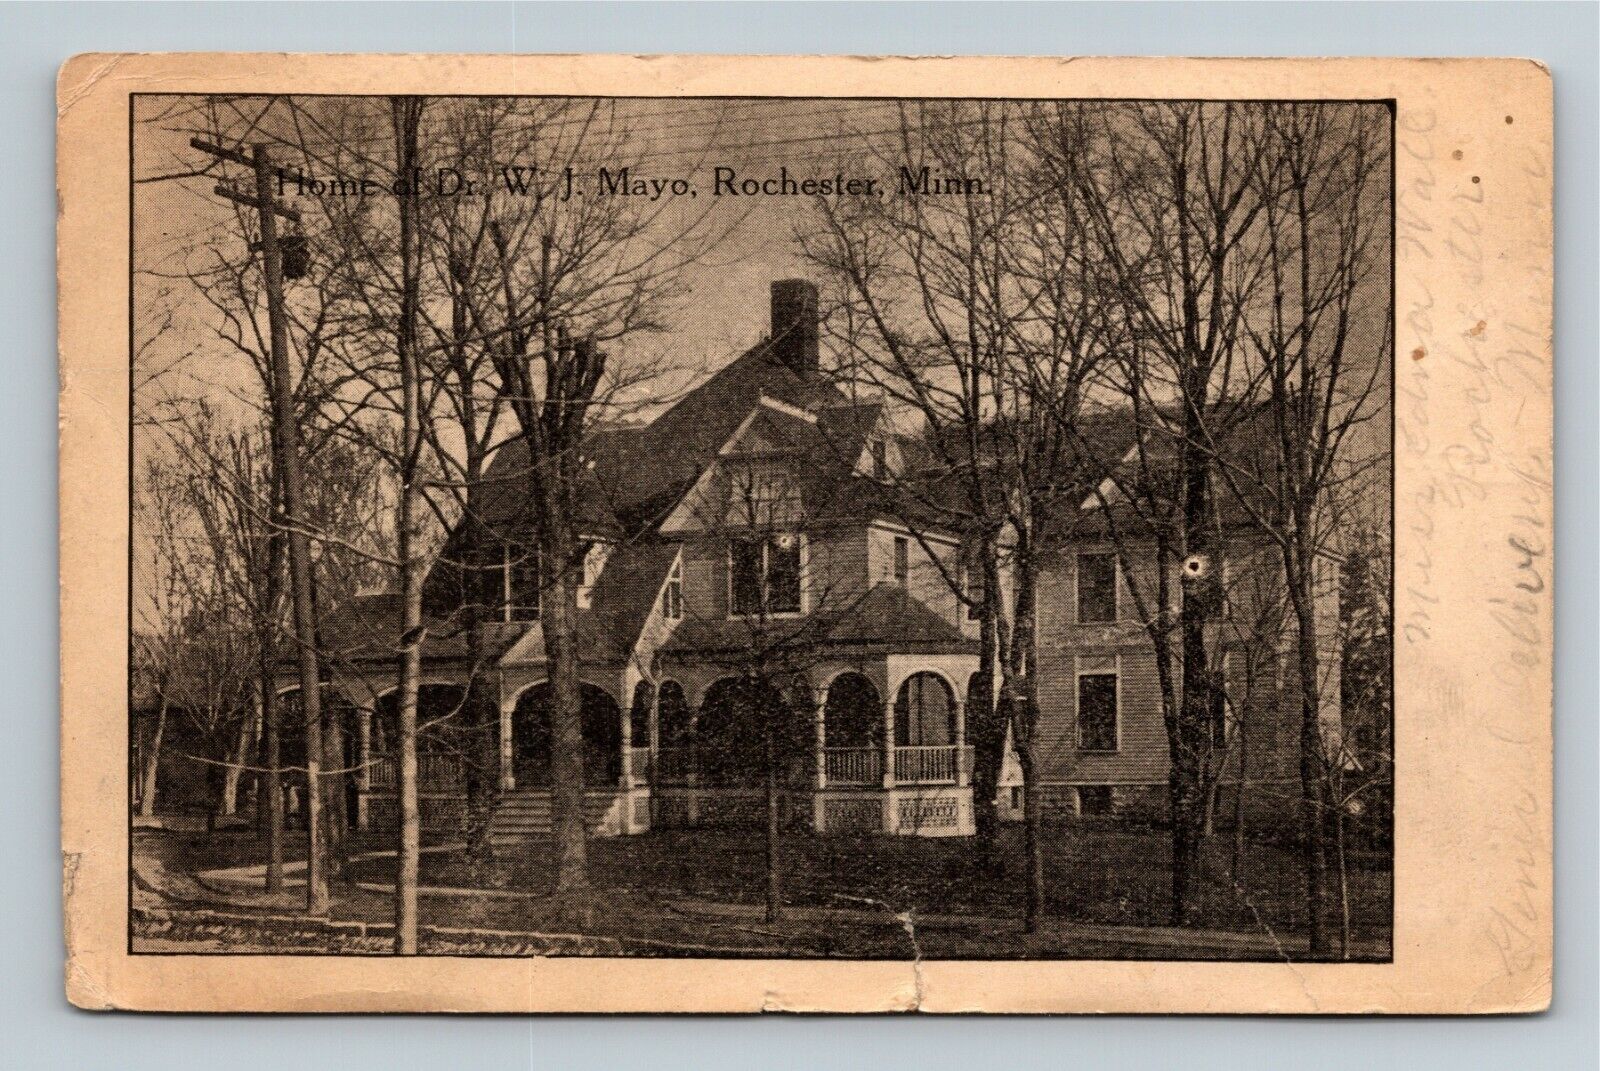 Rochester MN-Minnesota, Home of Dr William James Mayo Physician Vintage Postcard